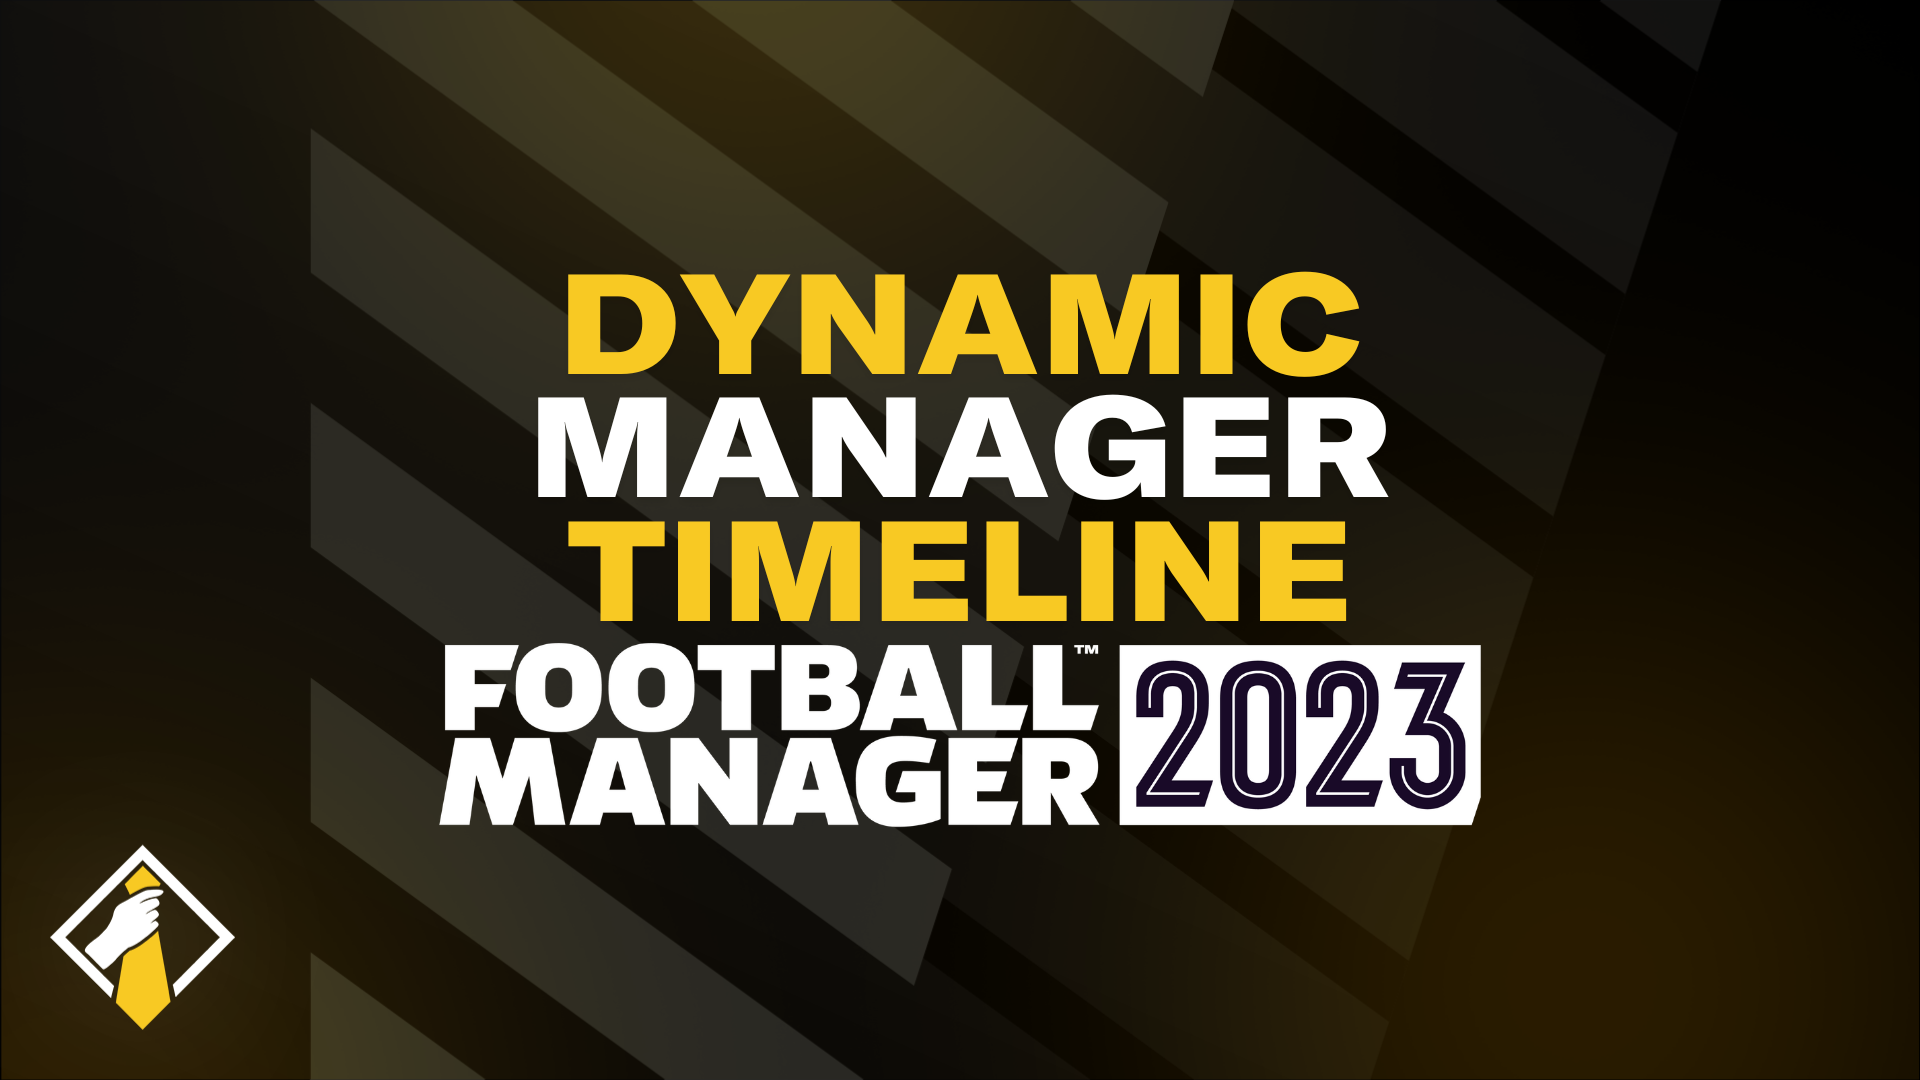 Football Manager 2023: Dynamic Manager Timeline